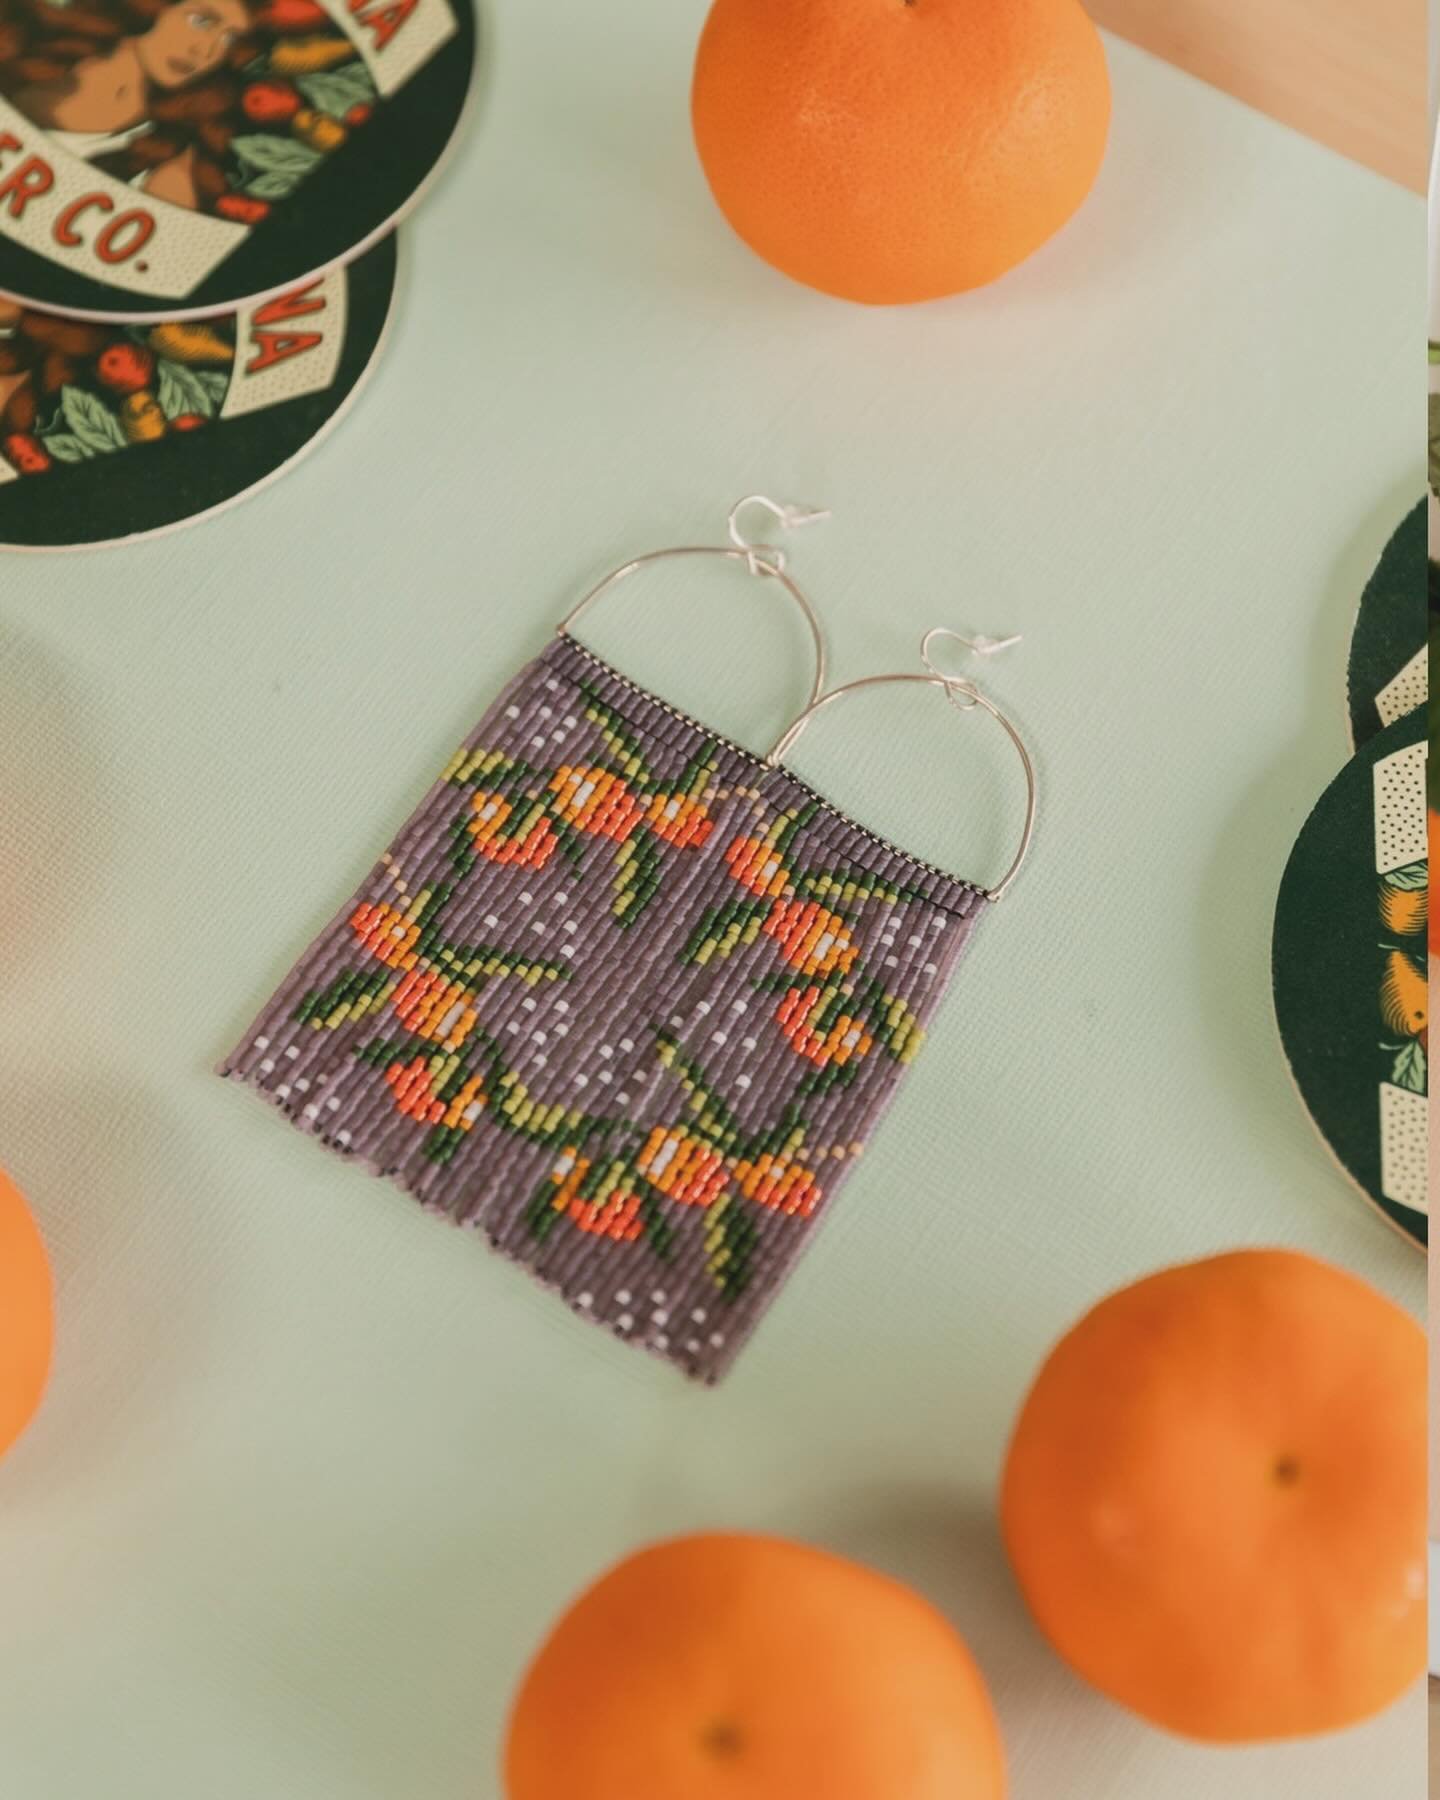 + Shop Update Tomorrow +

🍋🍊🇮🇹Italy Collection goes on sale tomorrow 

Keep a little piece of an Italian Summer close to you with these little limoncello and aranciata drops or mega patterned danglers. All handcrafted for our recent ventures in I